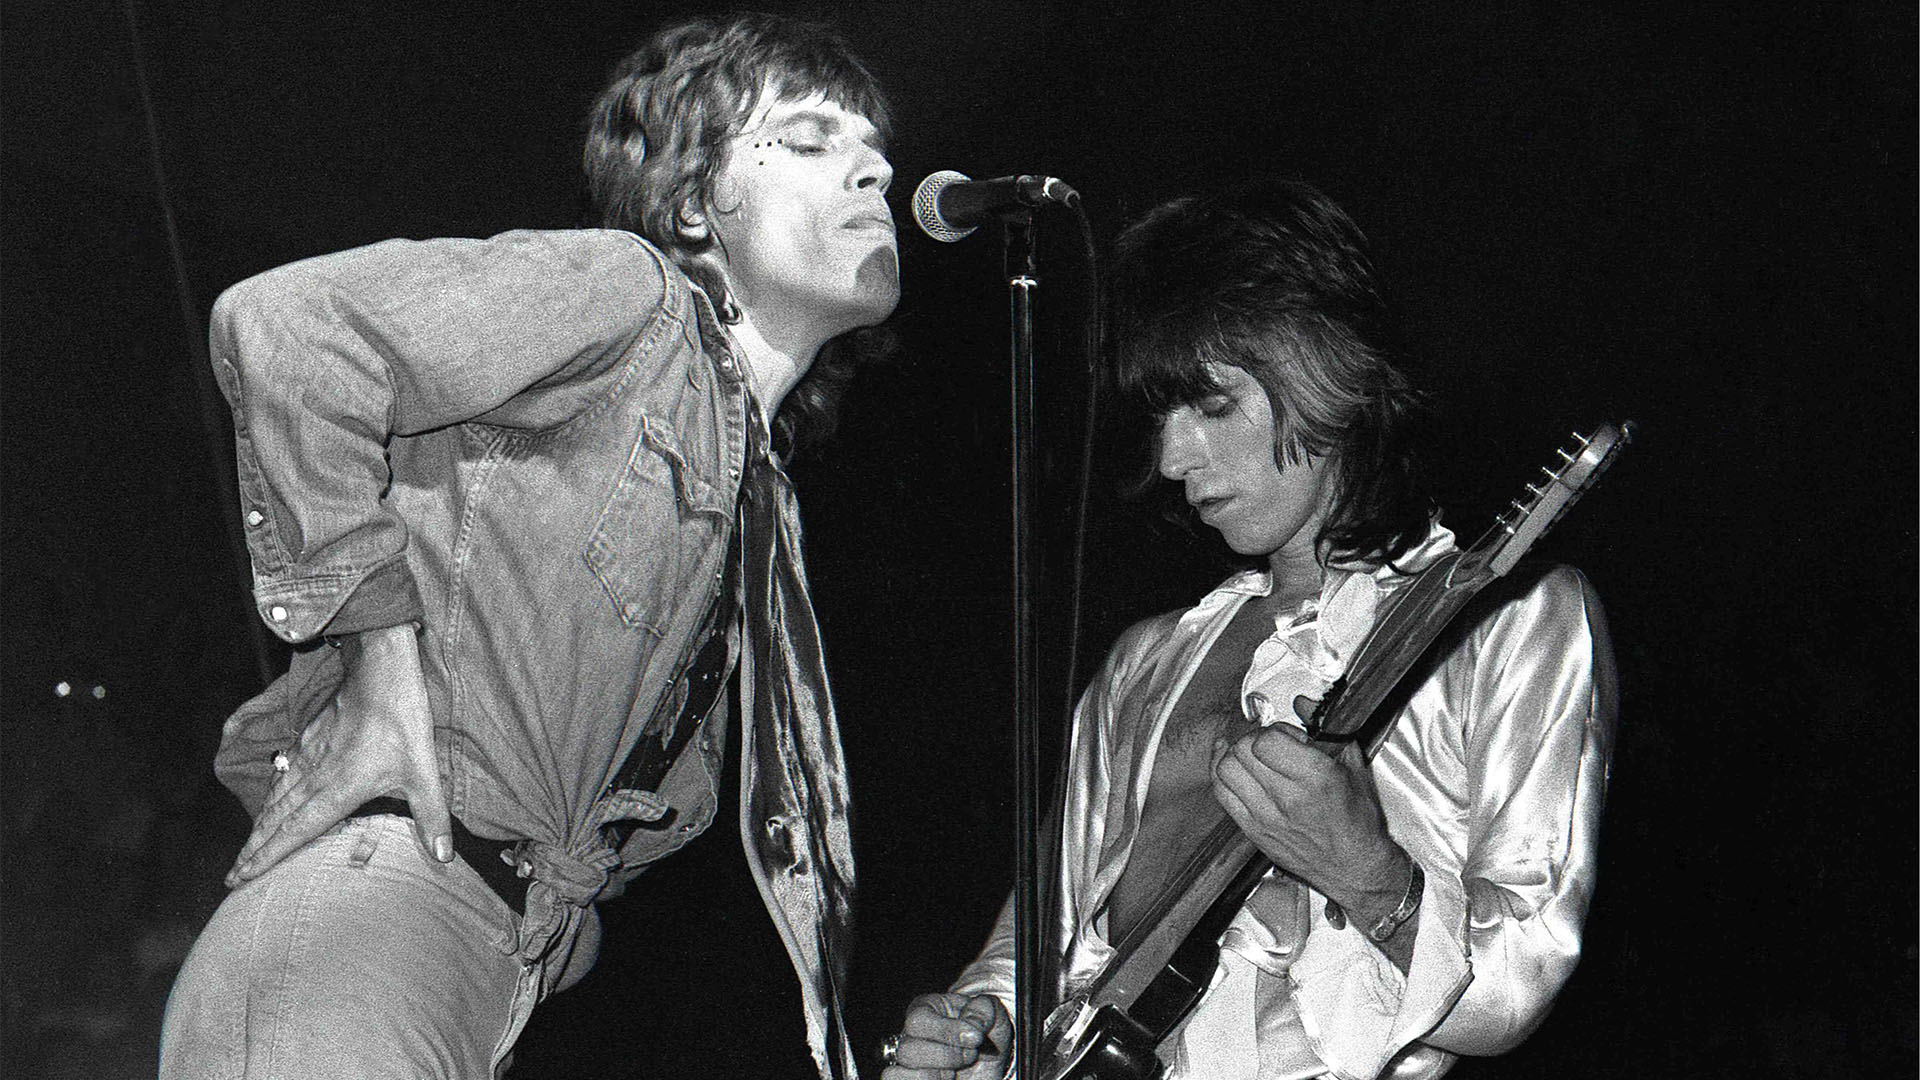 Mick Jagger and Keith Richards on stage (Photo by Robert Knight Archive/Redferns)